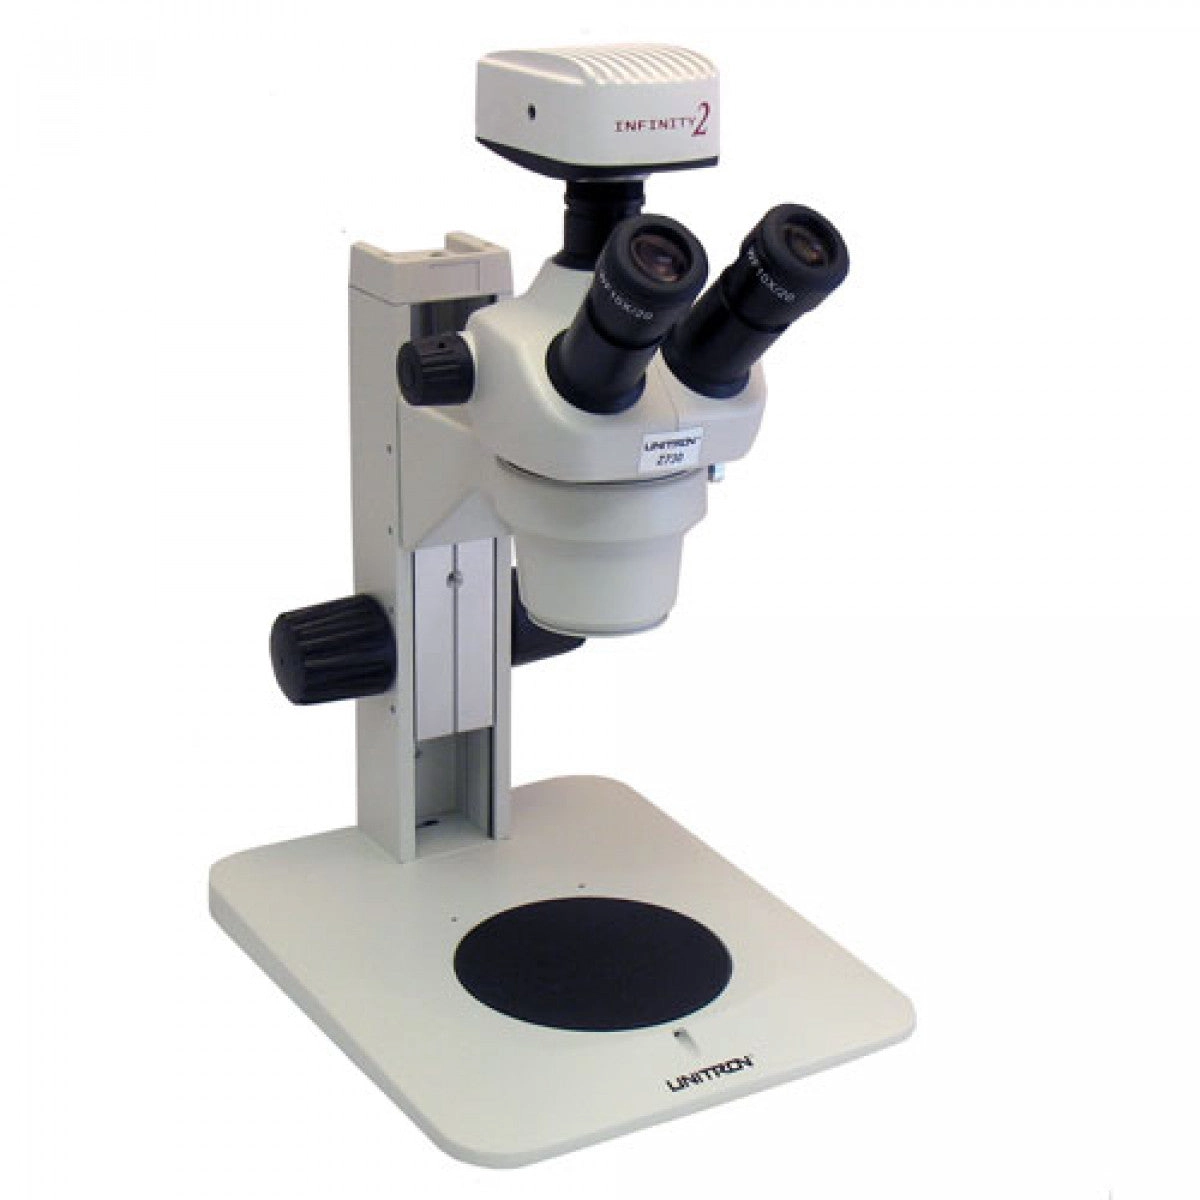 Unitron Z730 Zoom Stereo Microscope on Plain Focusing Stand